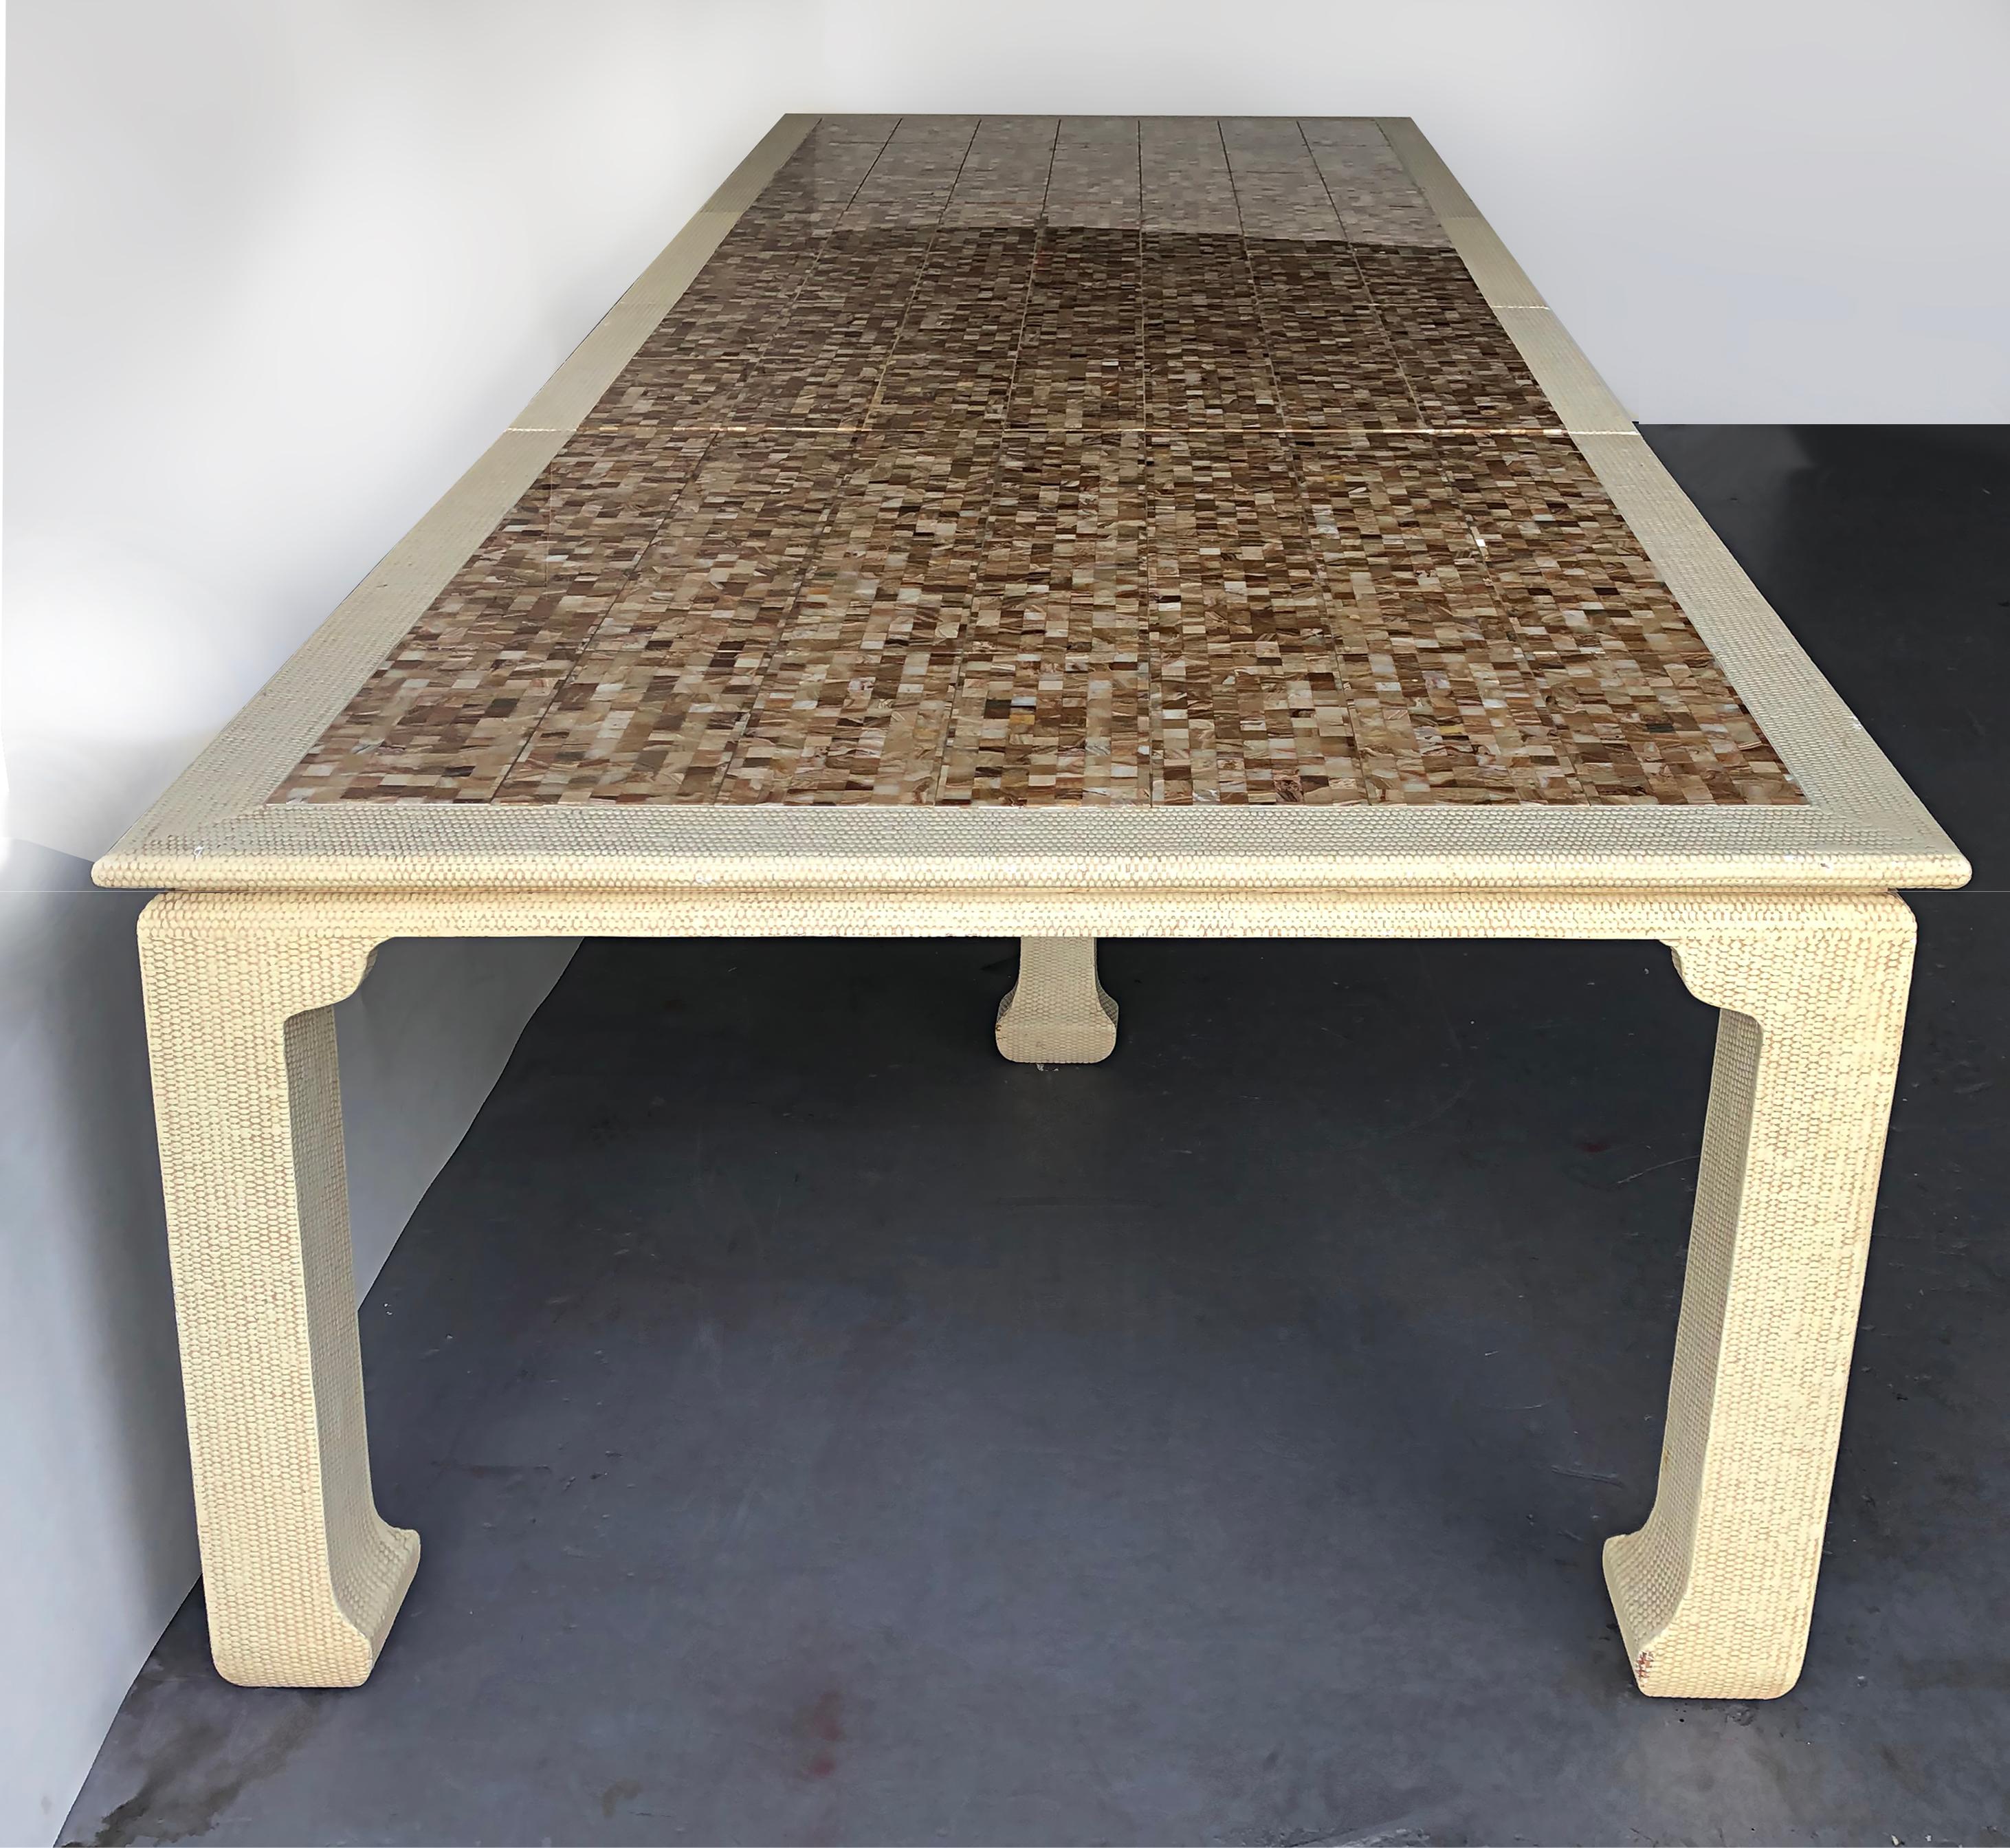 Tessellated Onyx expandable custom dining table, 2 leaves

Offered for sale is a custom-made expandable dining table with an inset tessellated onyx top. The table extends to allow for the addition of 2 leaves. The table has interior legs for